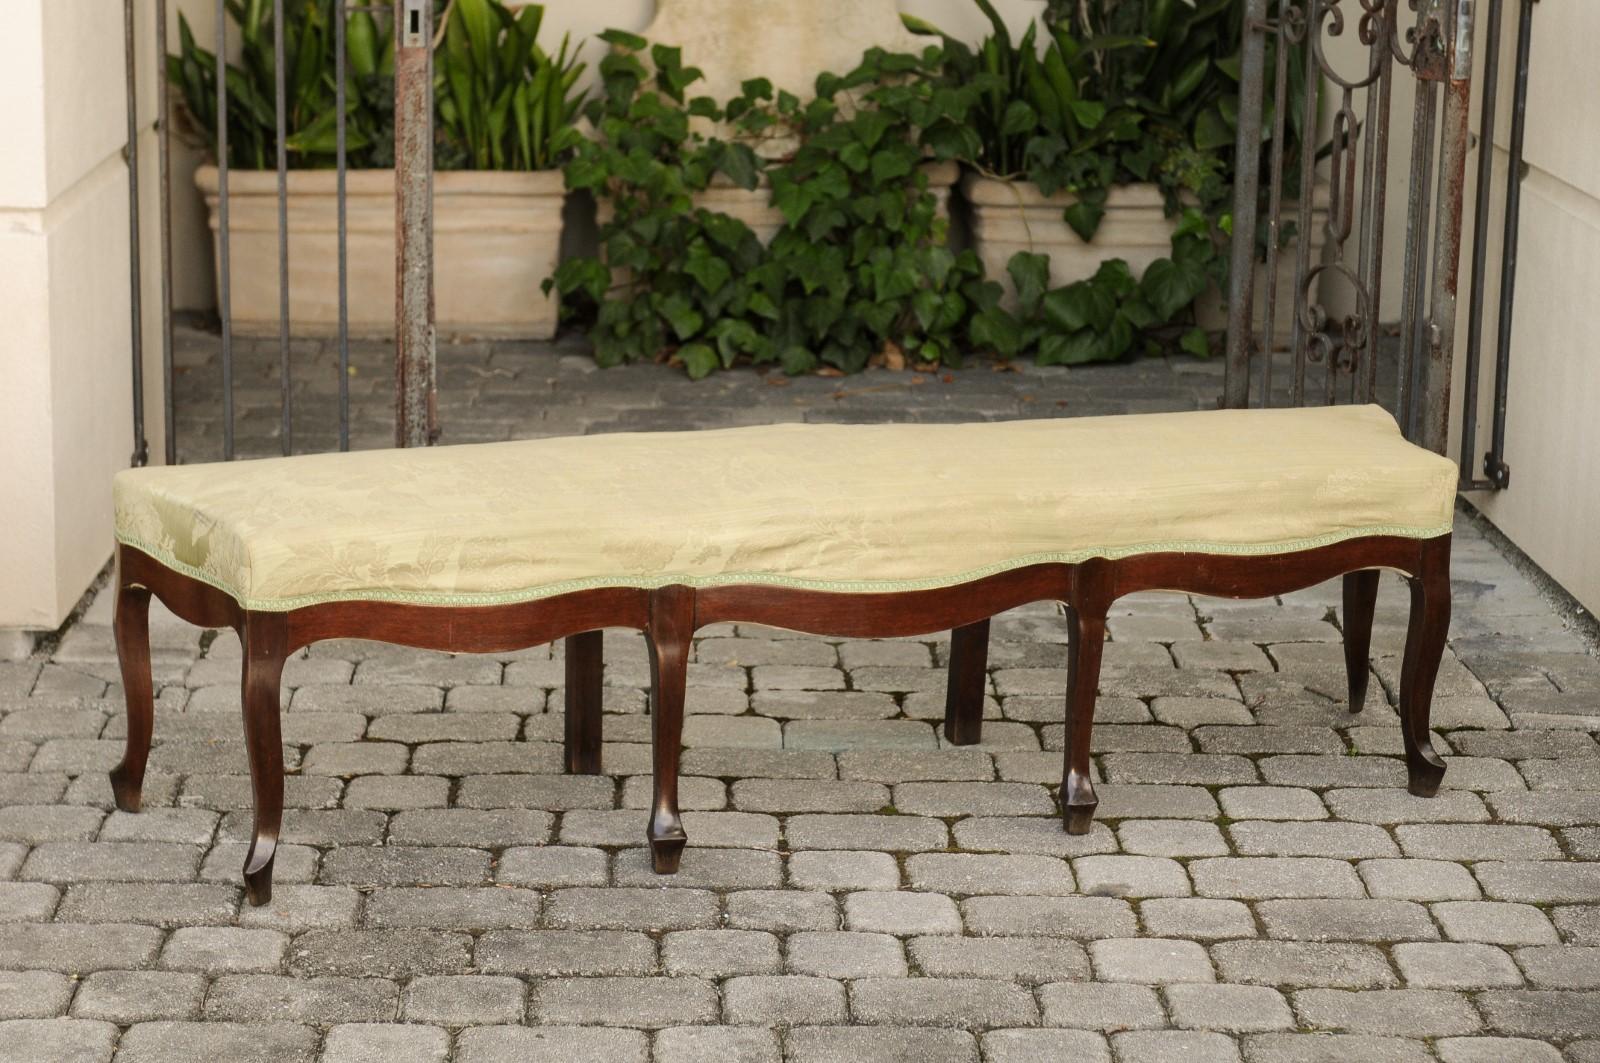 A French Louis XV style walnut bench from the early 20th century, with floral fabric and scalloped apron. Born in France during the Turn of the Century, this exquisite walnut bench features a rectangular serpentine top covered with a soft colored